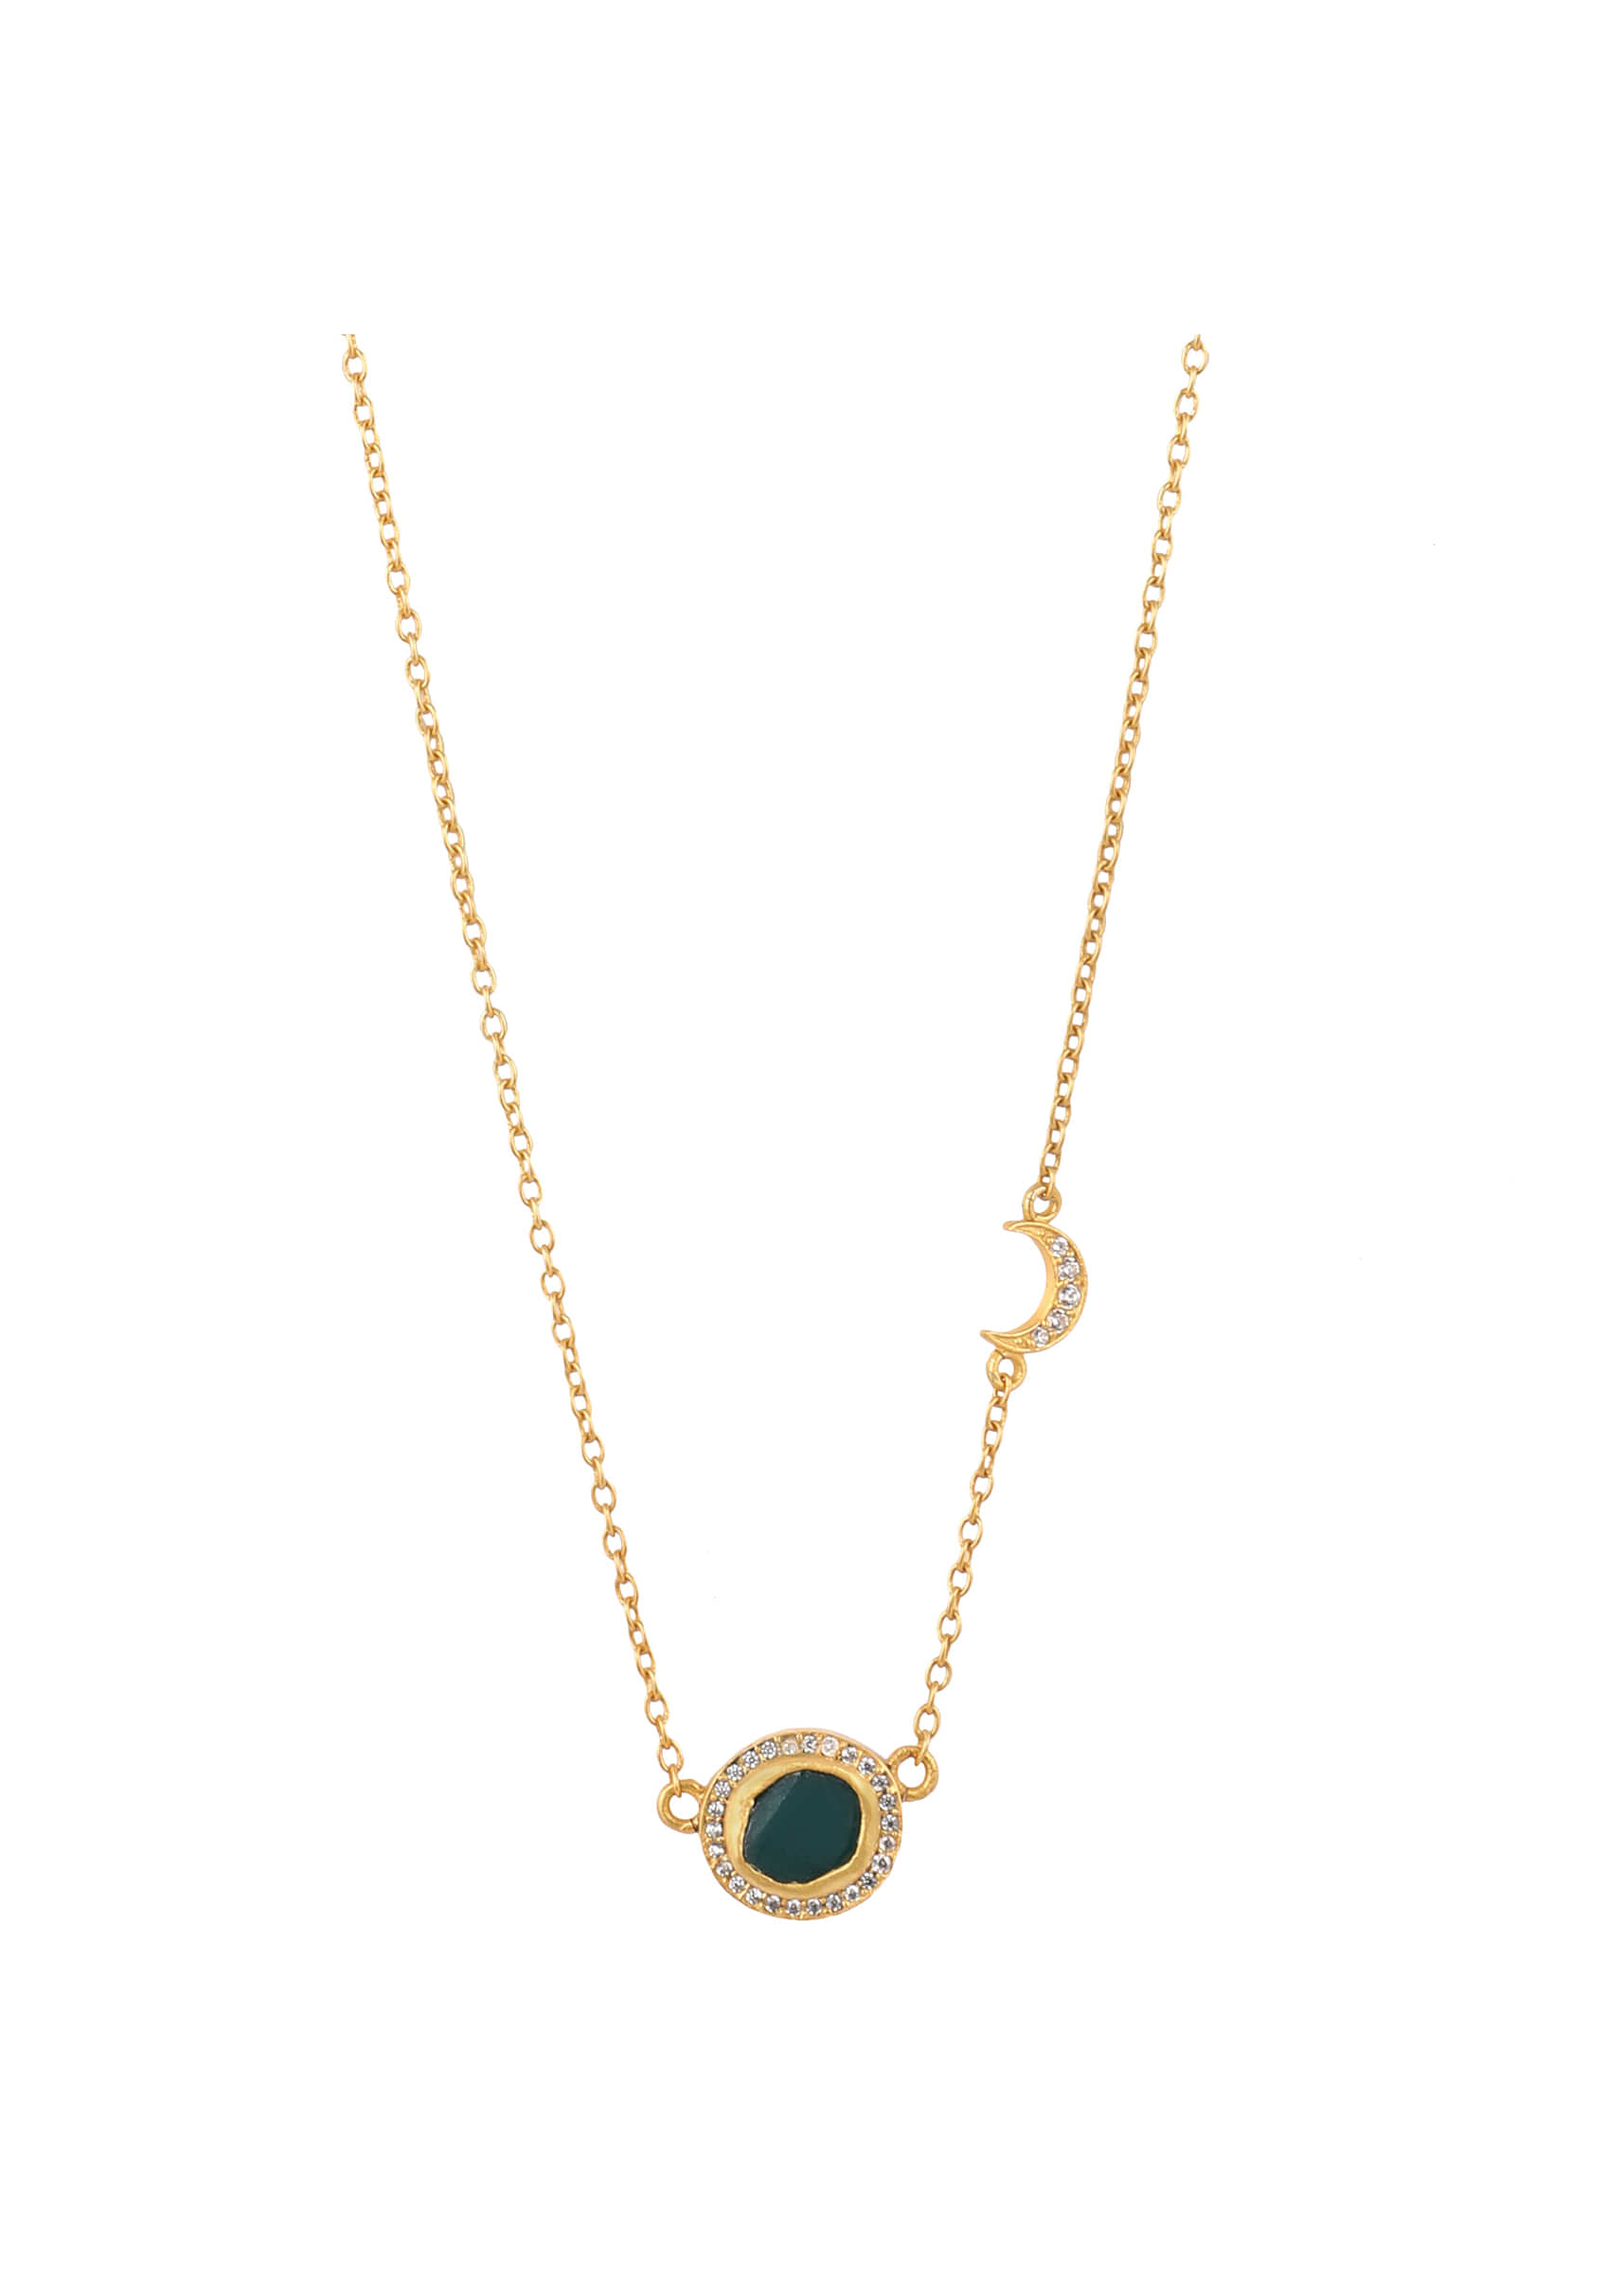 Gold Plated Necklace With Green Chalcedony Pendant And Studded With Cubic Zircons By Zariin